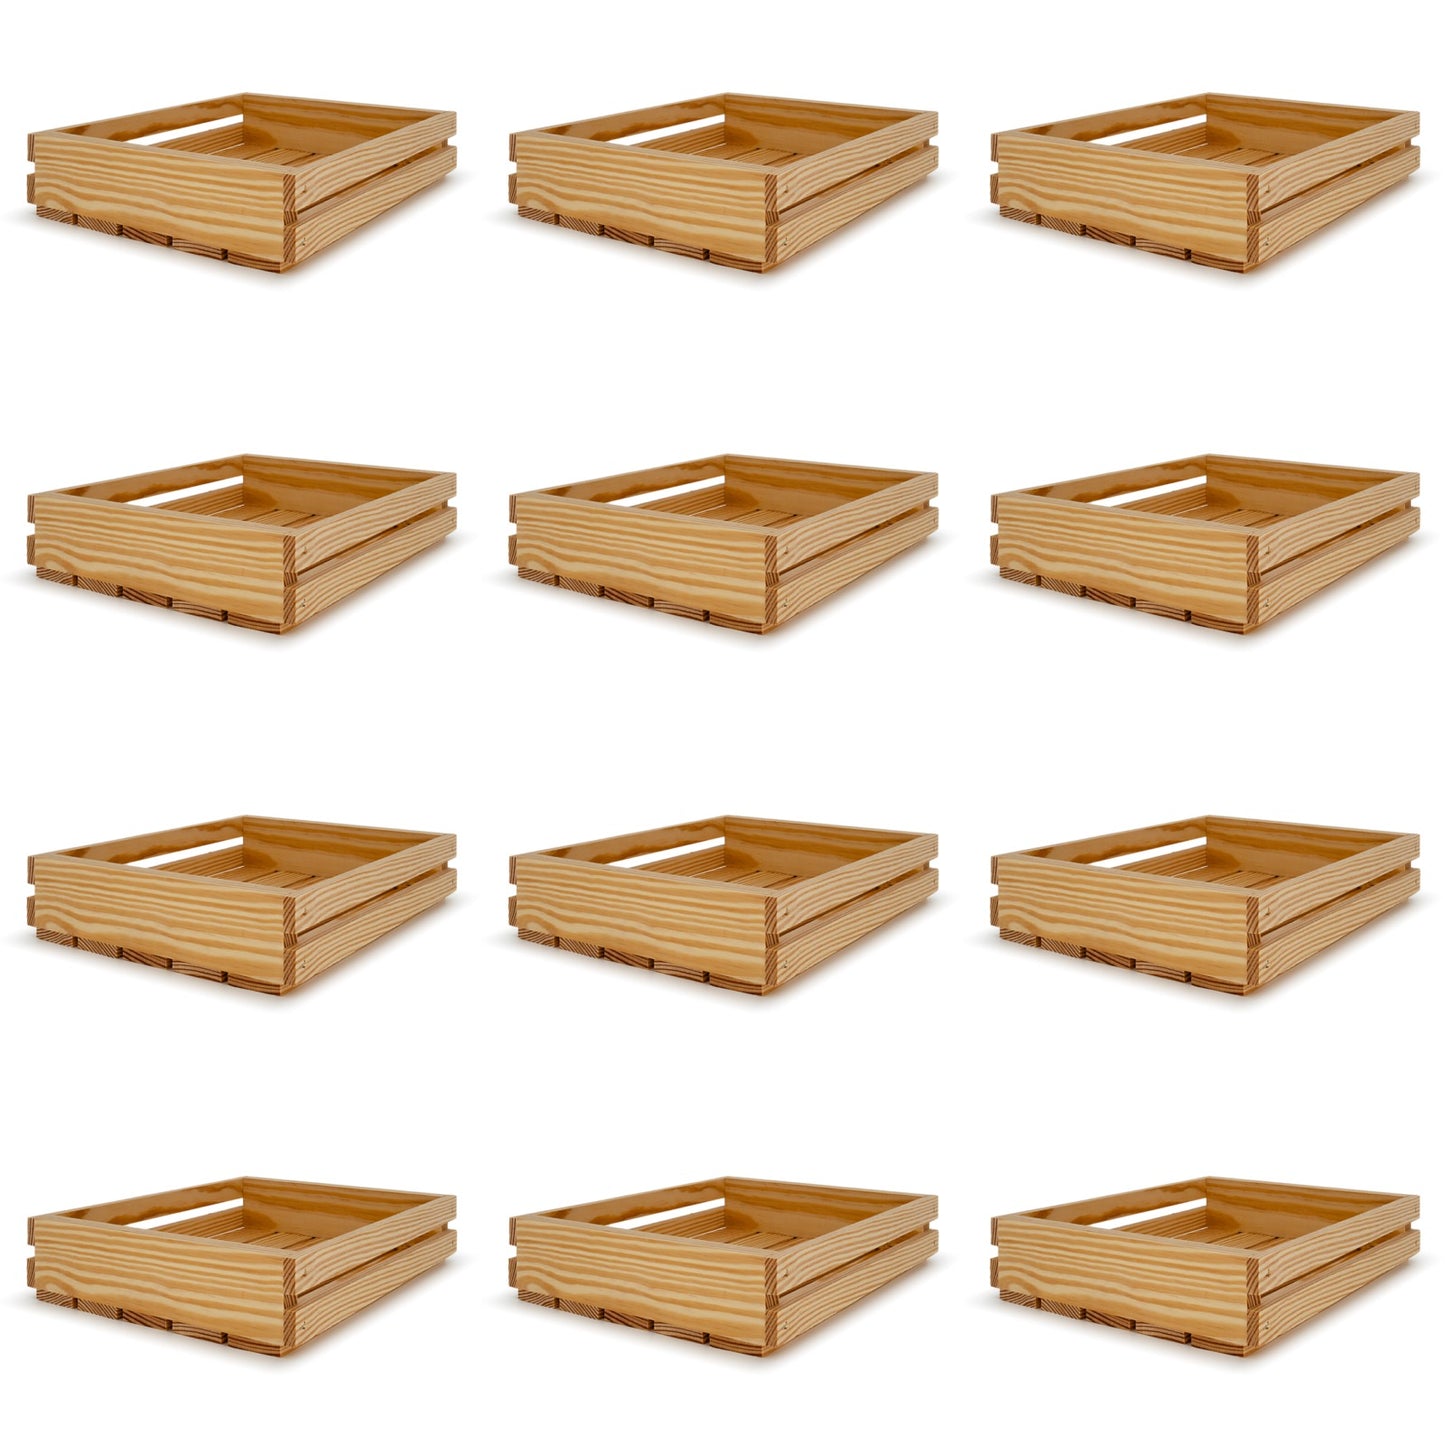 12 Small wooden crates 12x10x2.5